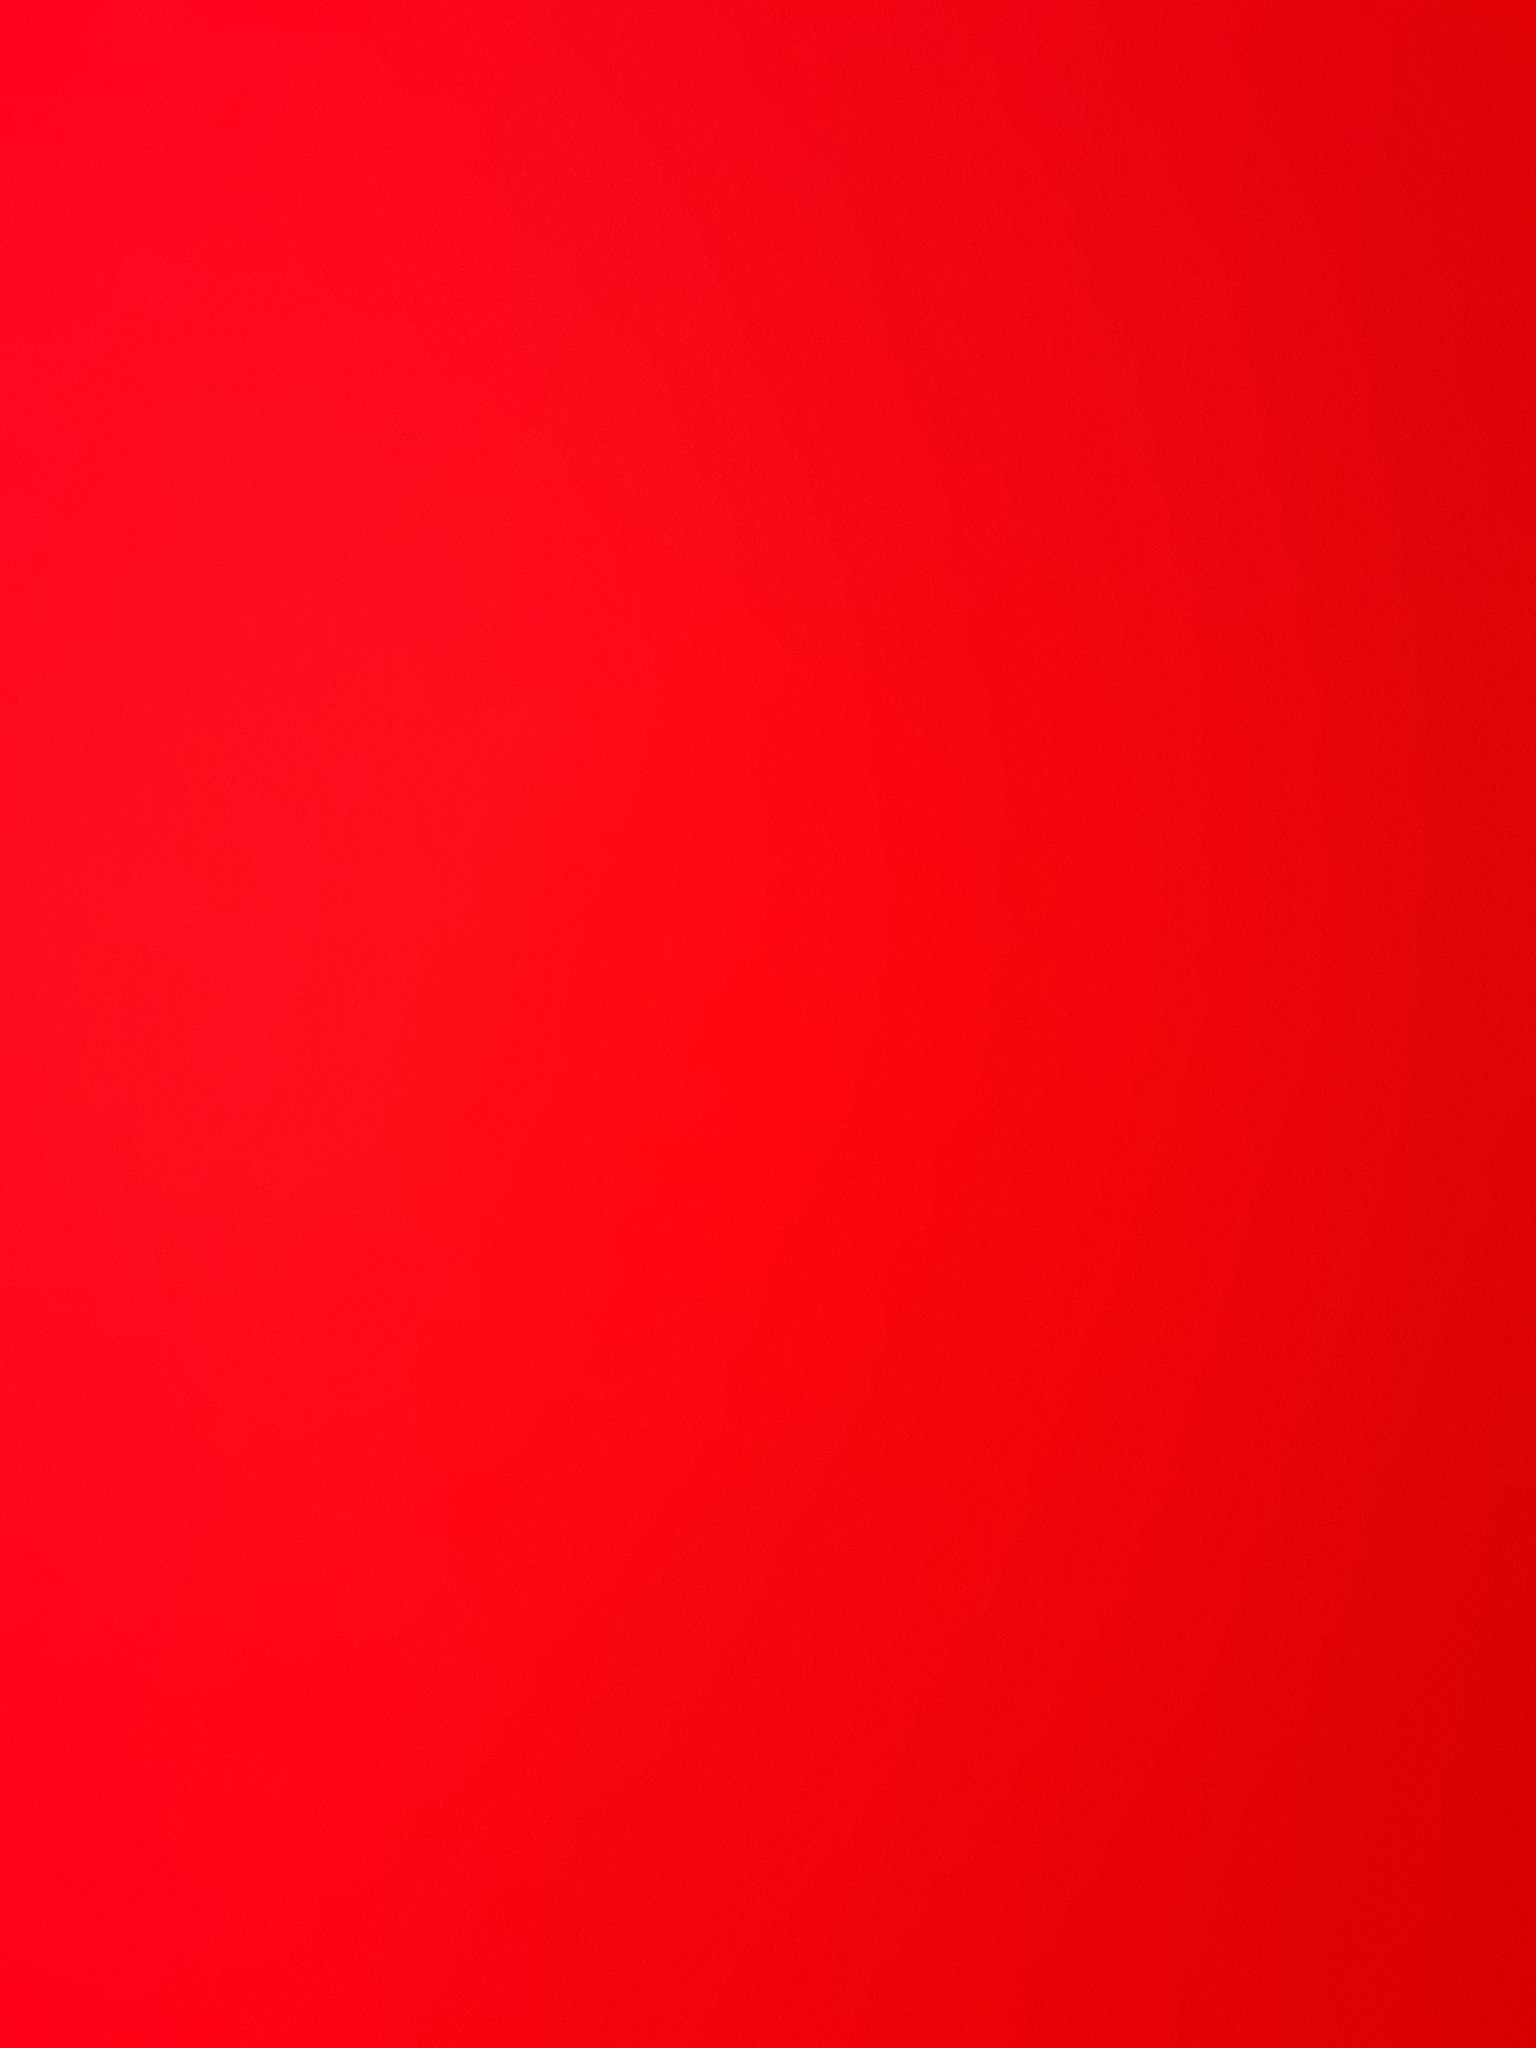 File:Red Color.jpg - Wikimedia Commons